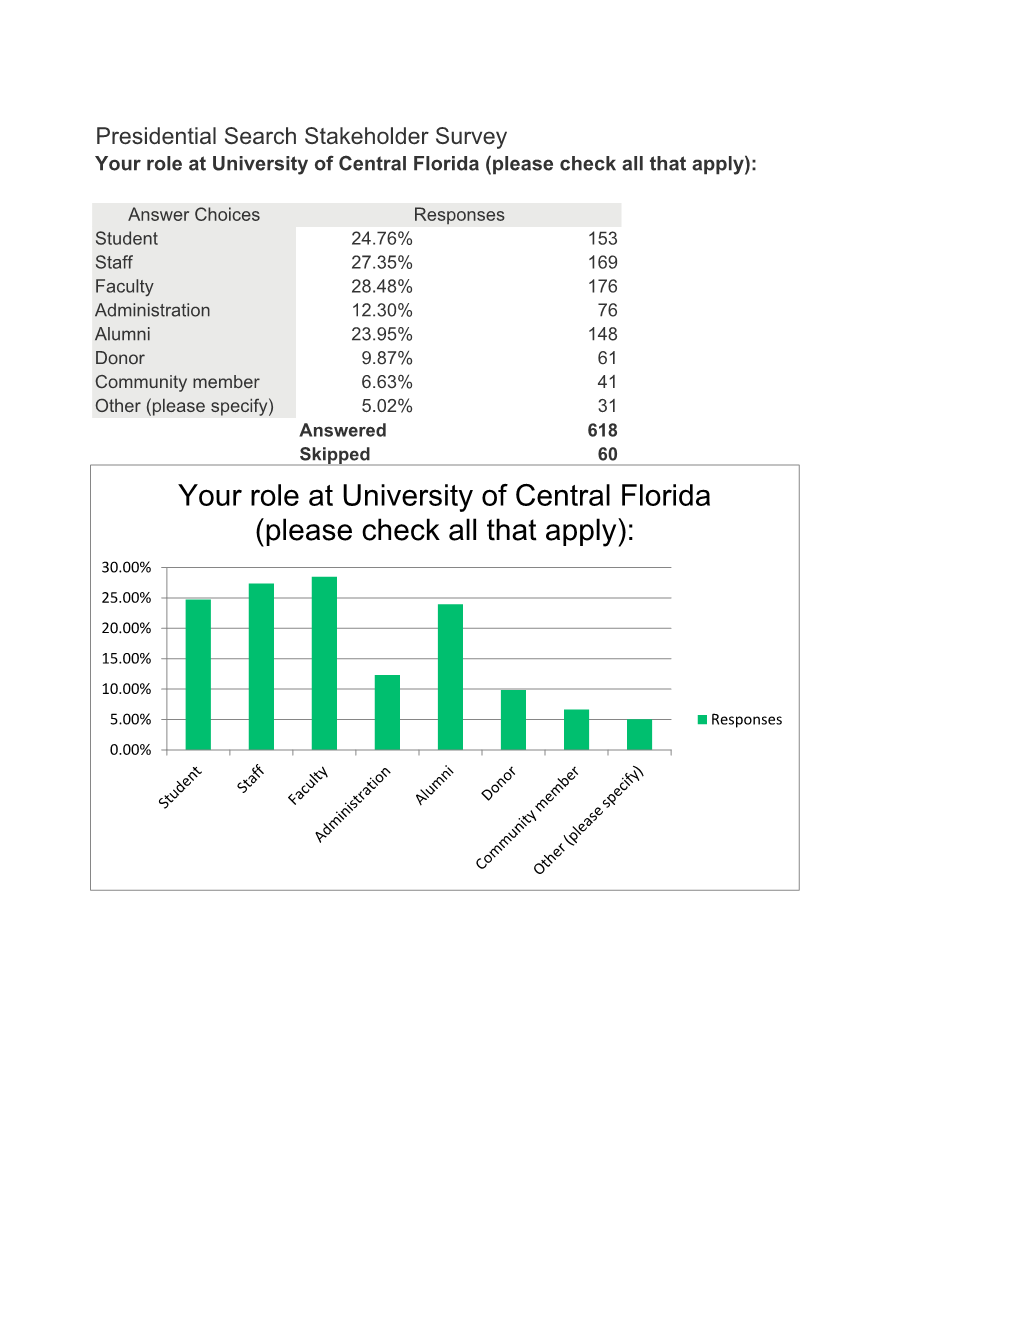 Presidential Search Stakeholder Survey Your Role at University of Central Florida (Please Check All That Apply)